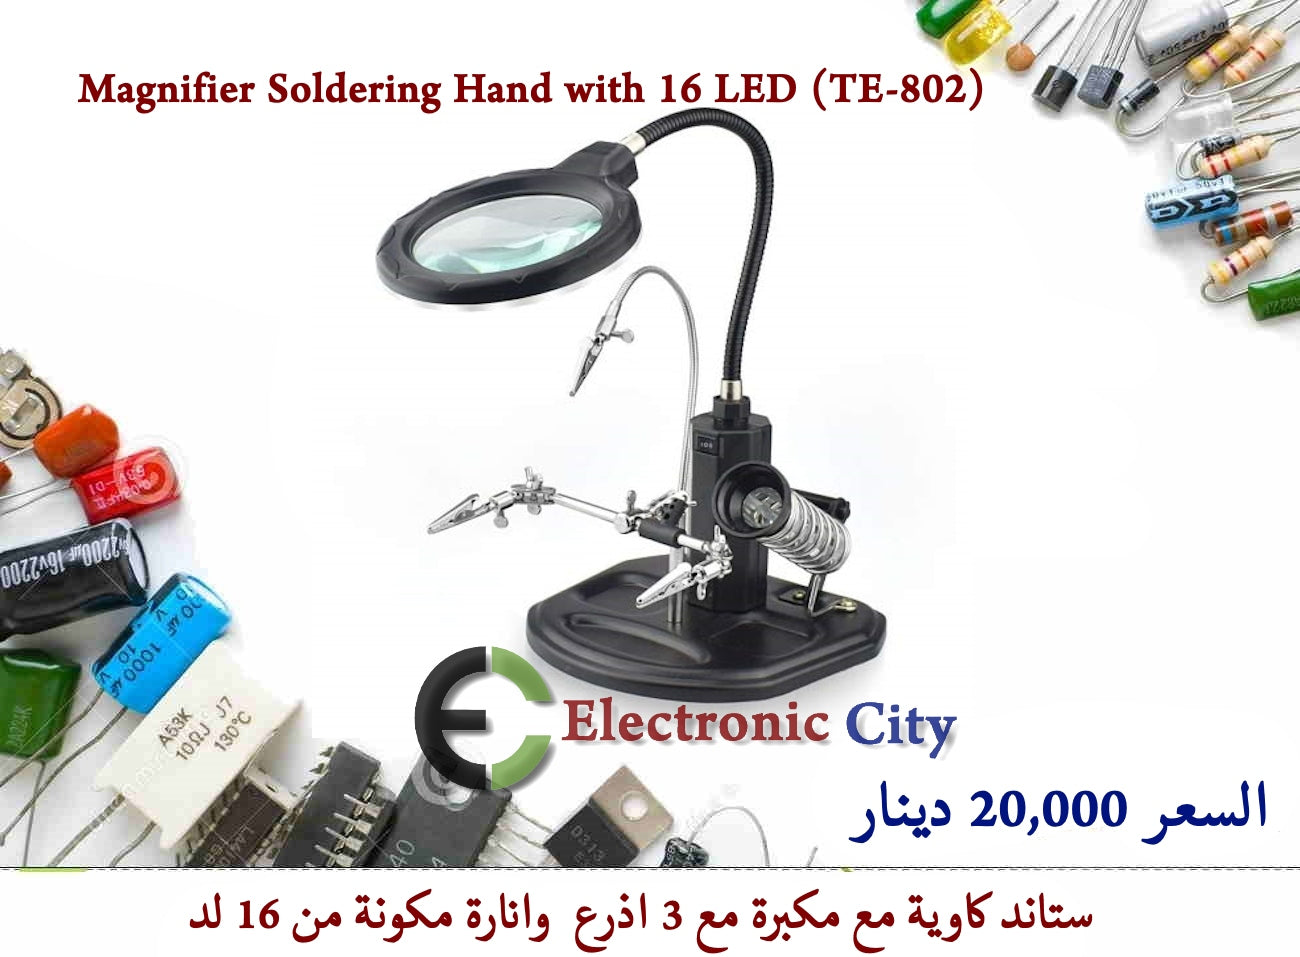 Magnifier Soldering Hand with 16 LED (TE-802)